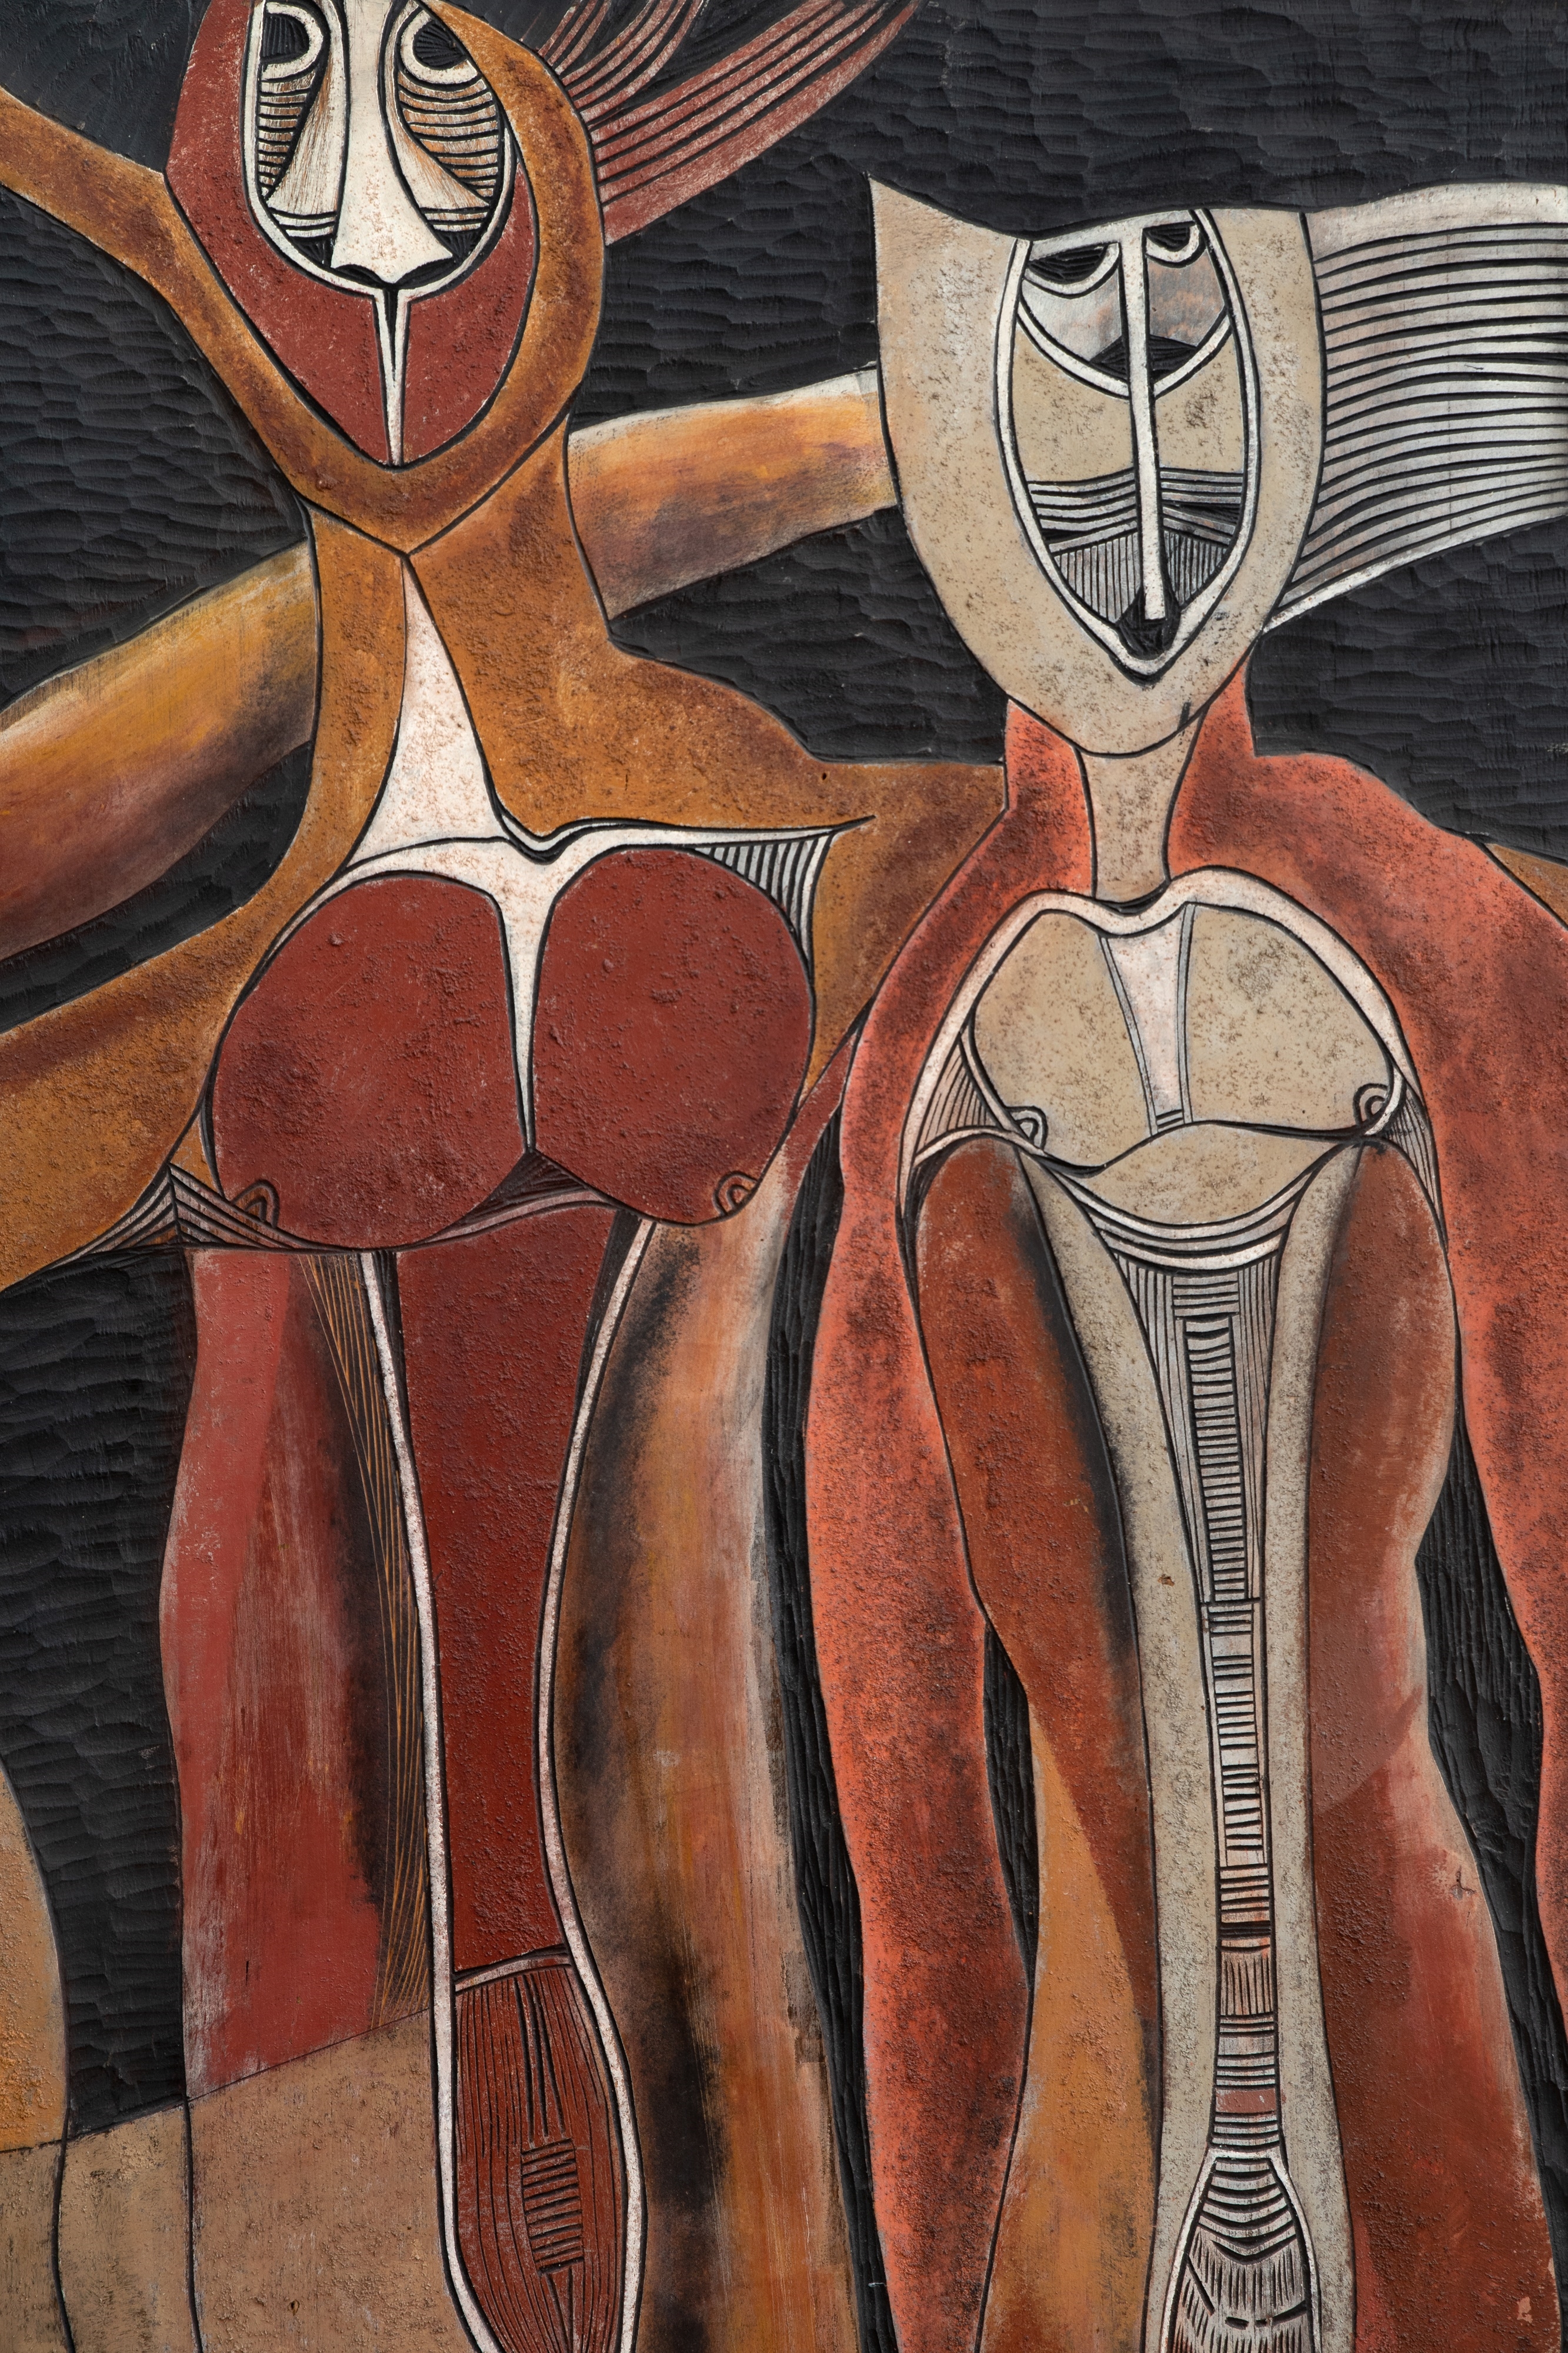 Artwork by Cecil Skotnes, Figure Composition, Made of carved, incised and painted wood panel